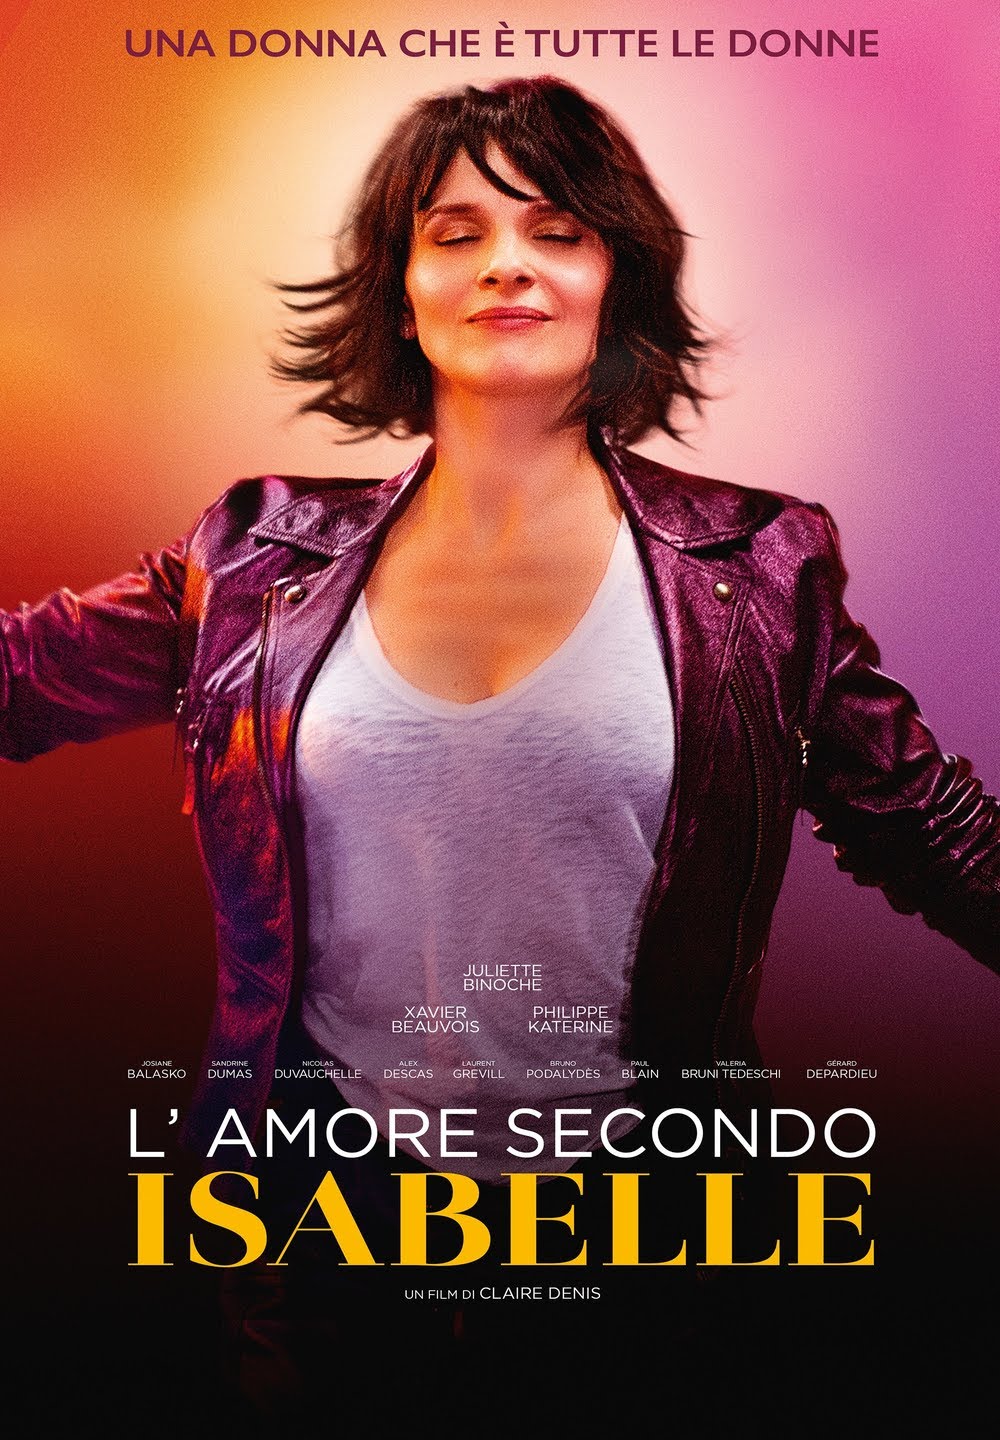 L’amore secondo Isabelle [HD] (2018)